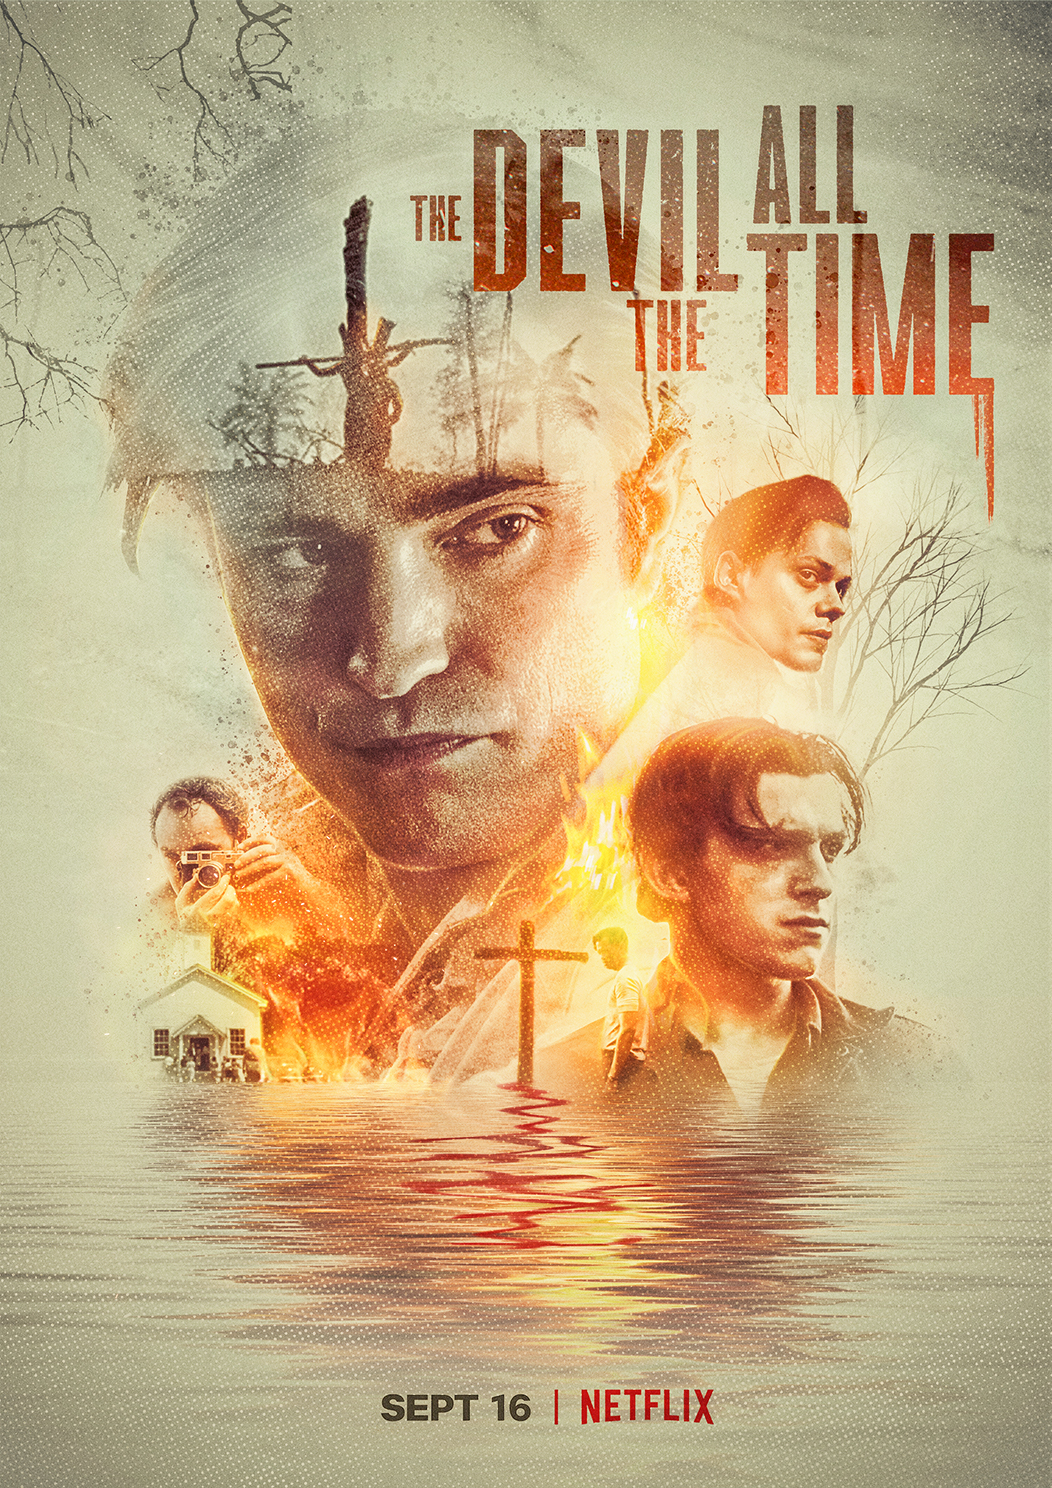 The Devil All the Time - A Movie Guy